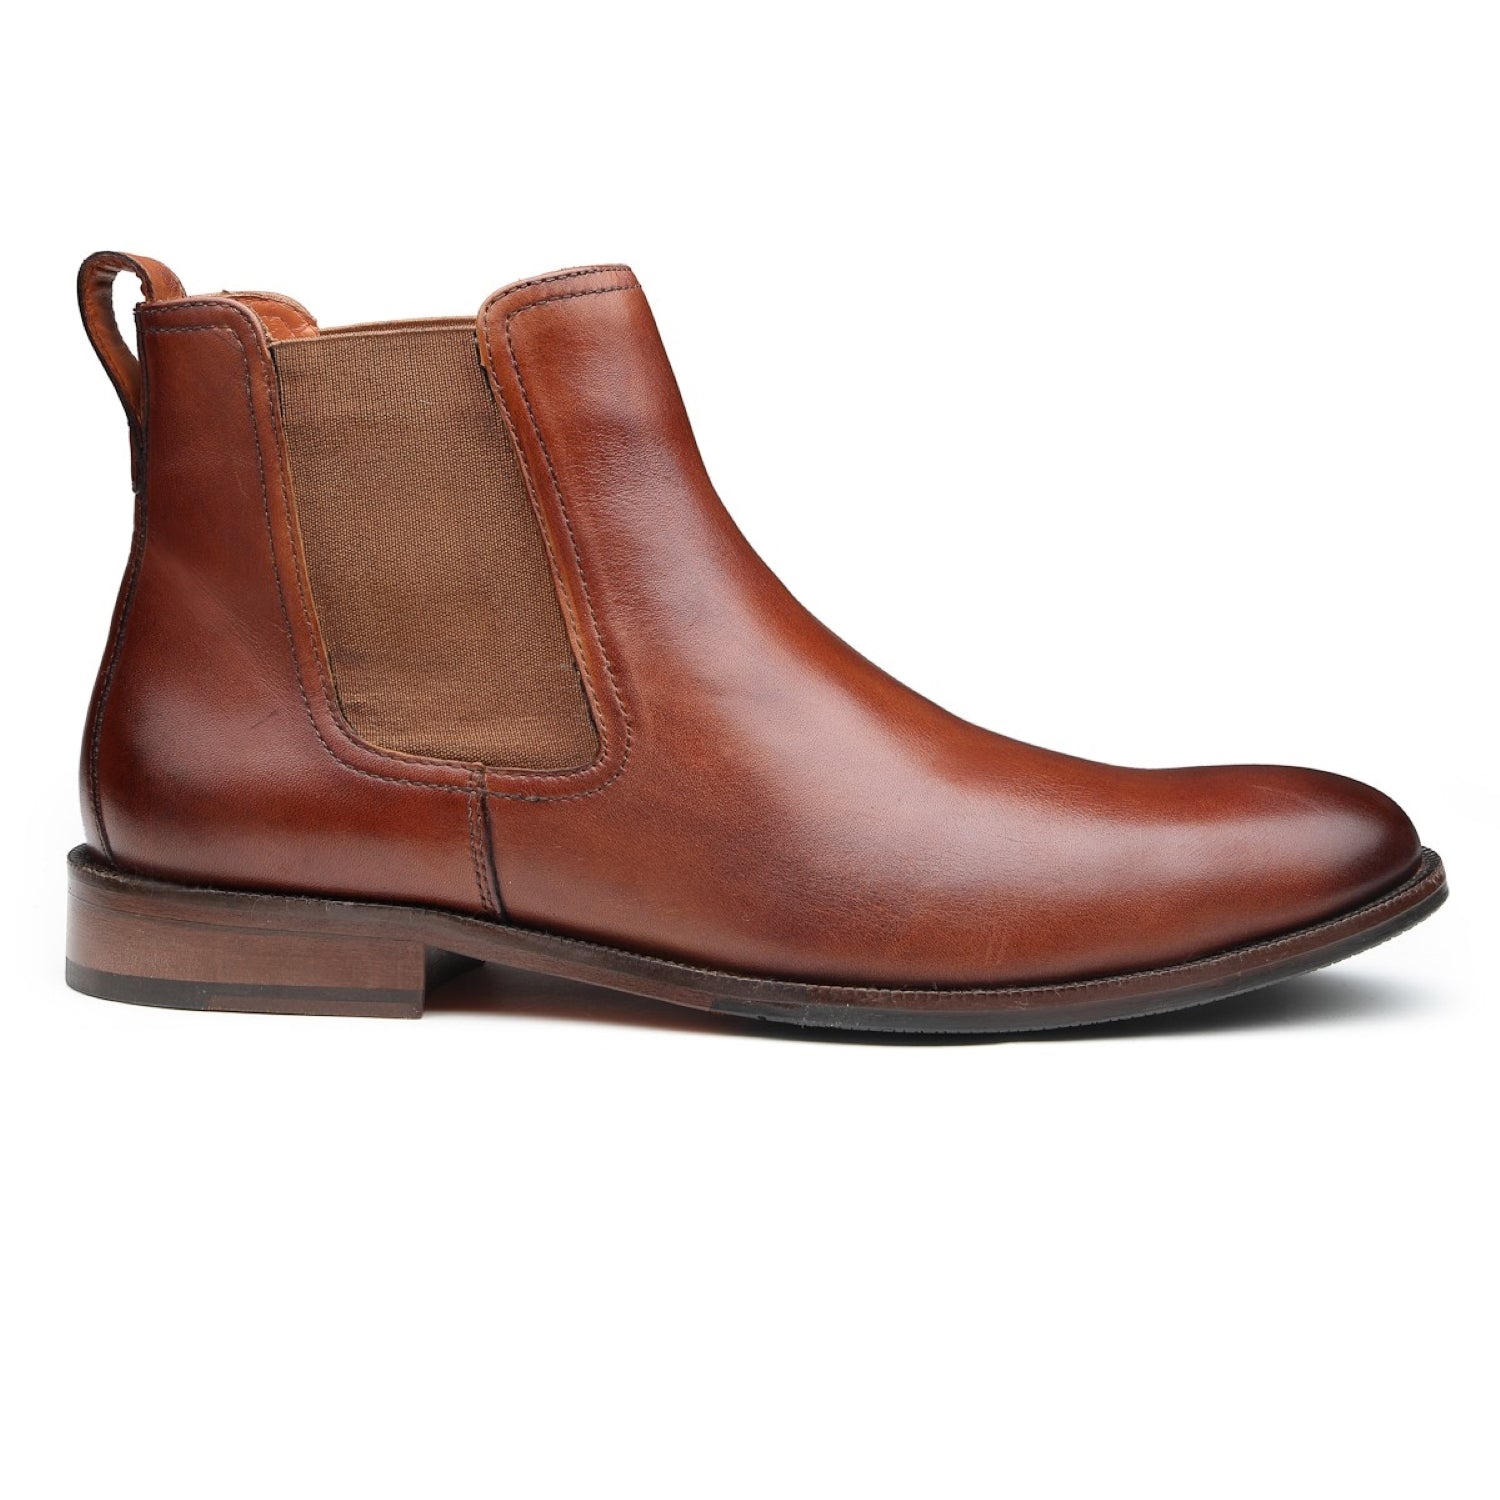 Premium Leather Boots For Men In India | Churchill & Company ...